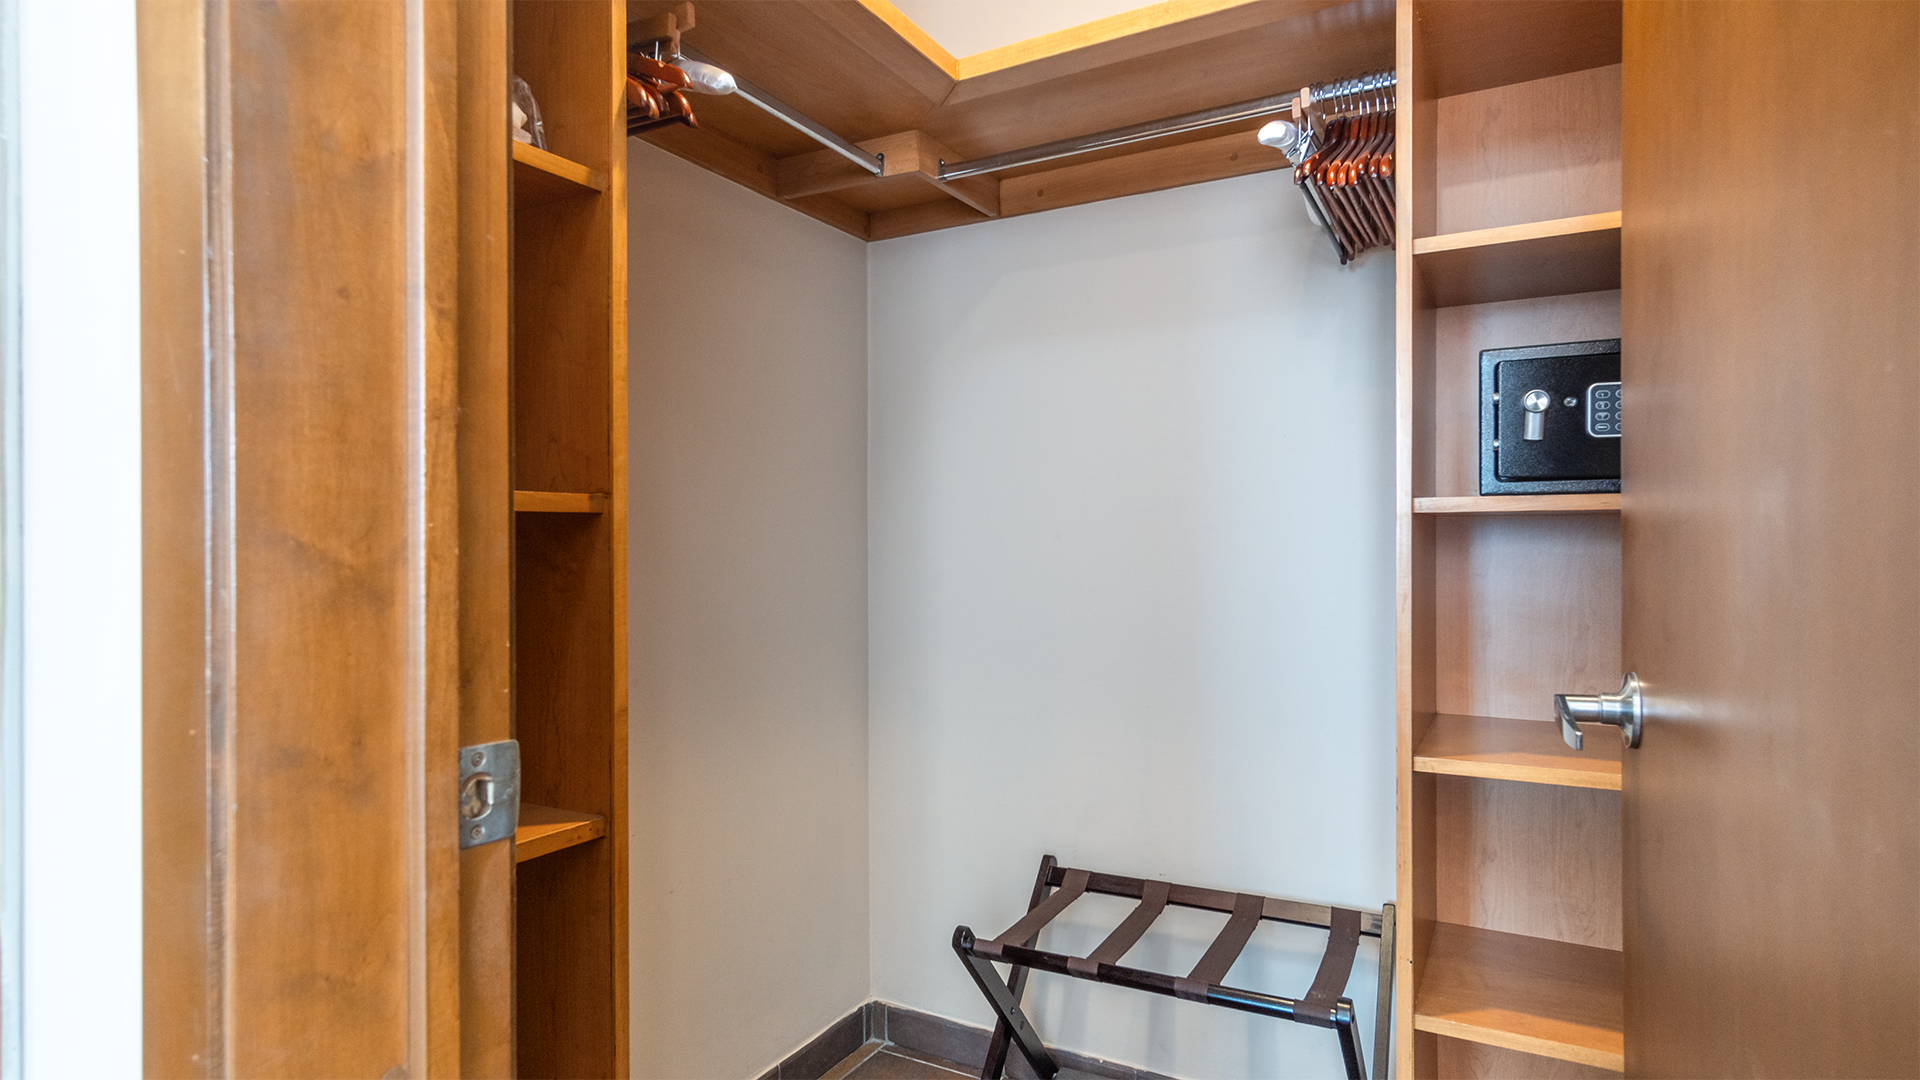 A walk in closet with shelves and a safe are part of the master bedroom.